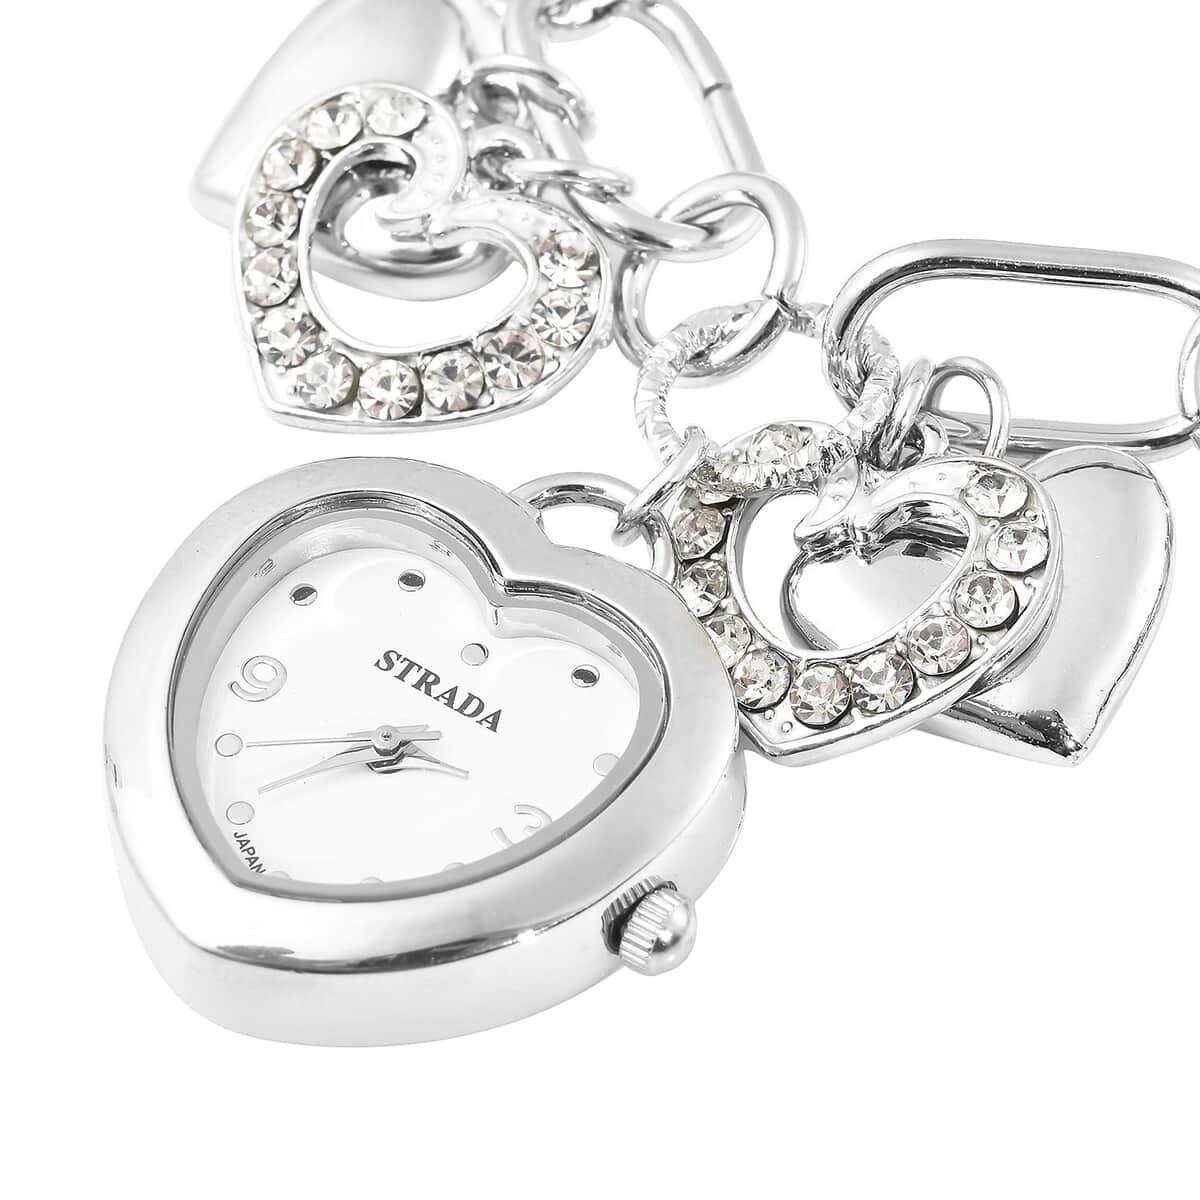 Strada White Austrian Crystal and Enameled Japanese Movement Charm Heart Bracelet Watch in Silvertone (7.5-9 in) image number 3